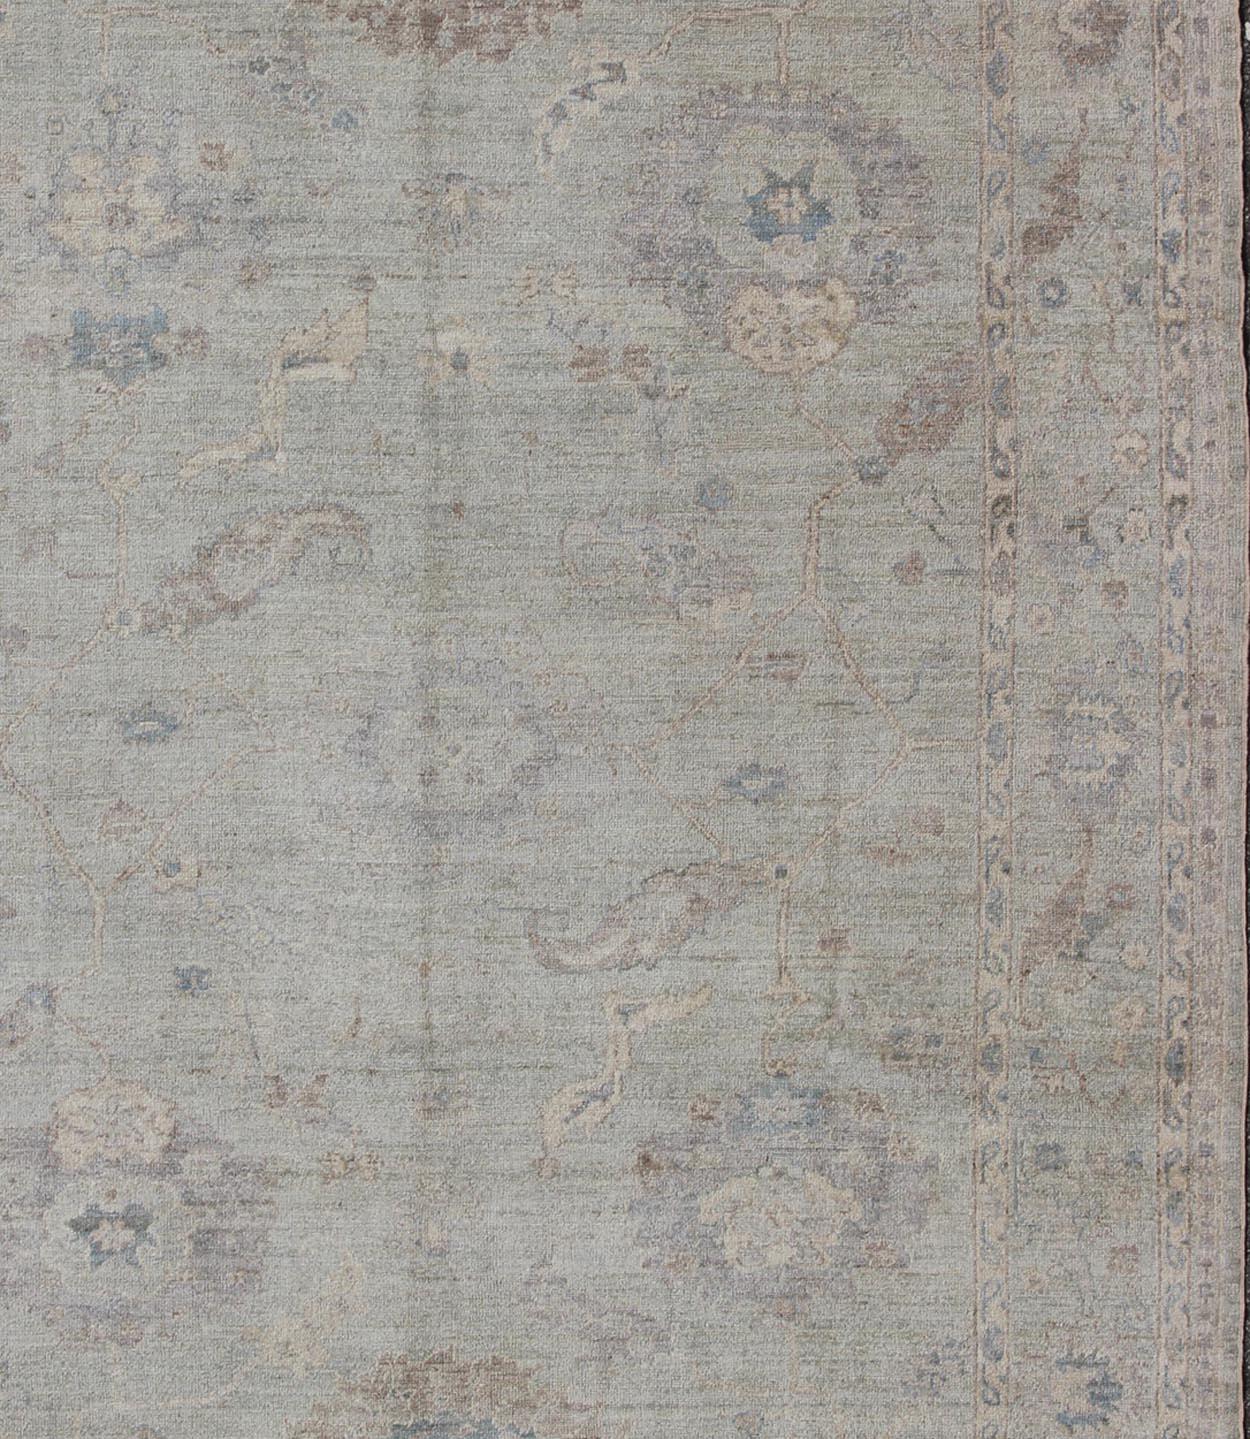 Wool Keivan Woven Arts Angora Oushak Turkish Rug in Shades of Light Blue and Cream For Sale